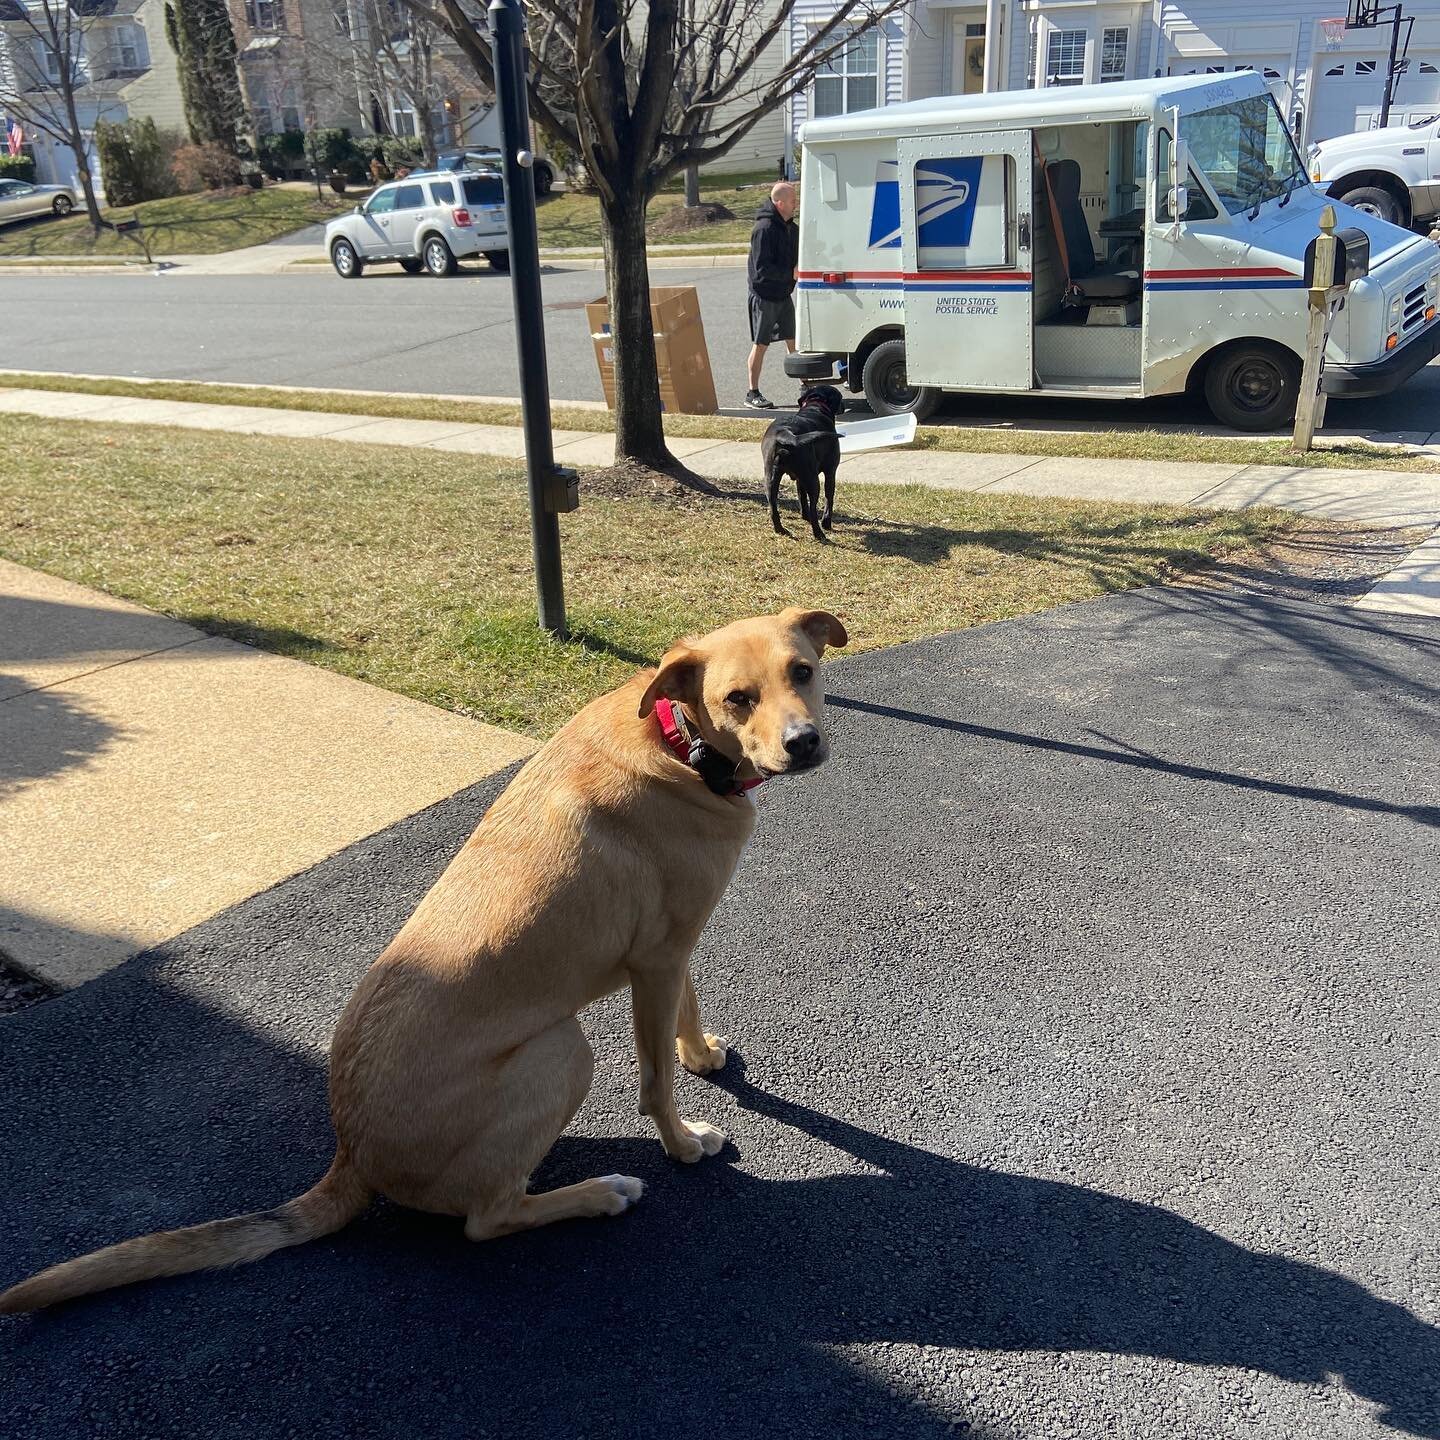 Edge K9: Building dogs &bull; Coaching owners &bull; 1 leash at a time 

Toby continues to grow in his off leash freedom.  He waits patiently for dad to finish with the postman so that he can get his training time in. 

Where should Toby go next? Com